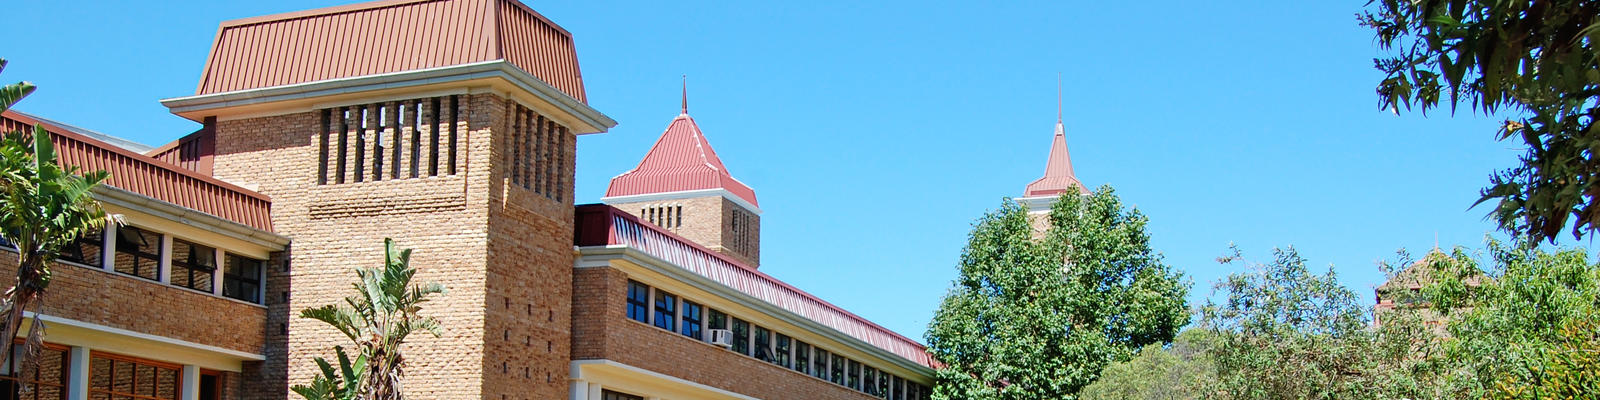 One of the buildings of the University of the Western Cape in Cape Town, Africa